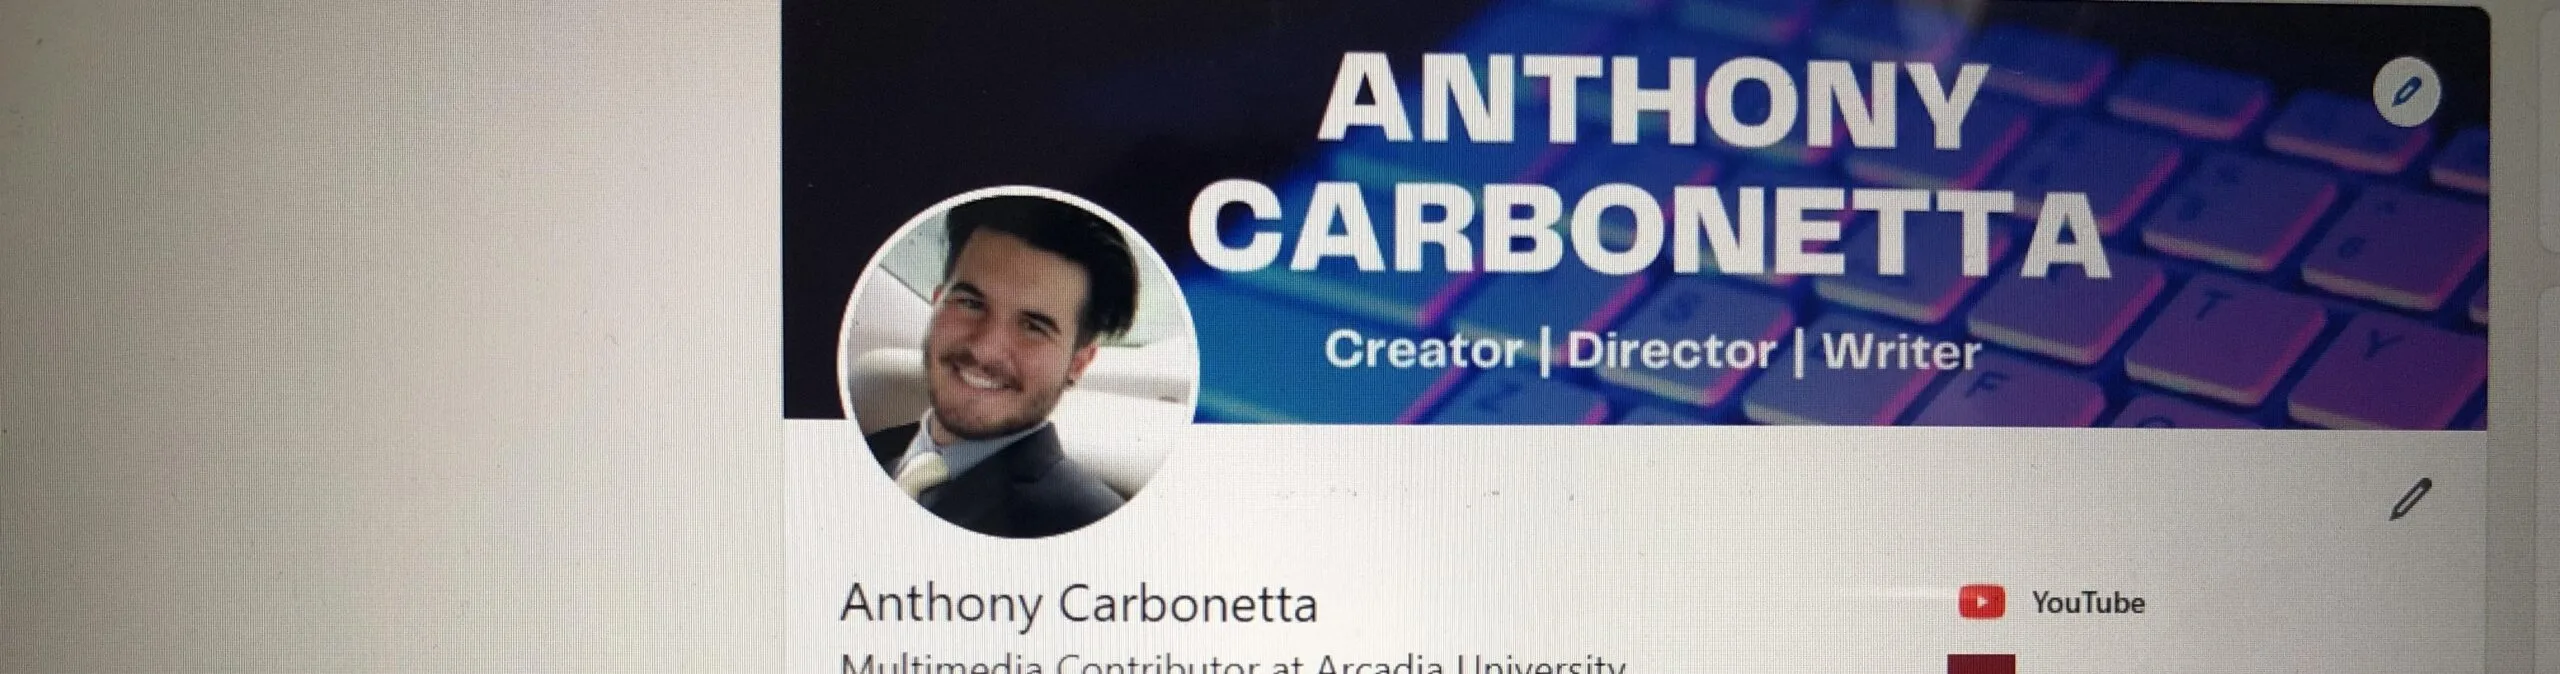 Profile picture and cover photo for Anthony Carbonetta.